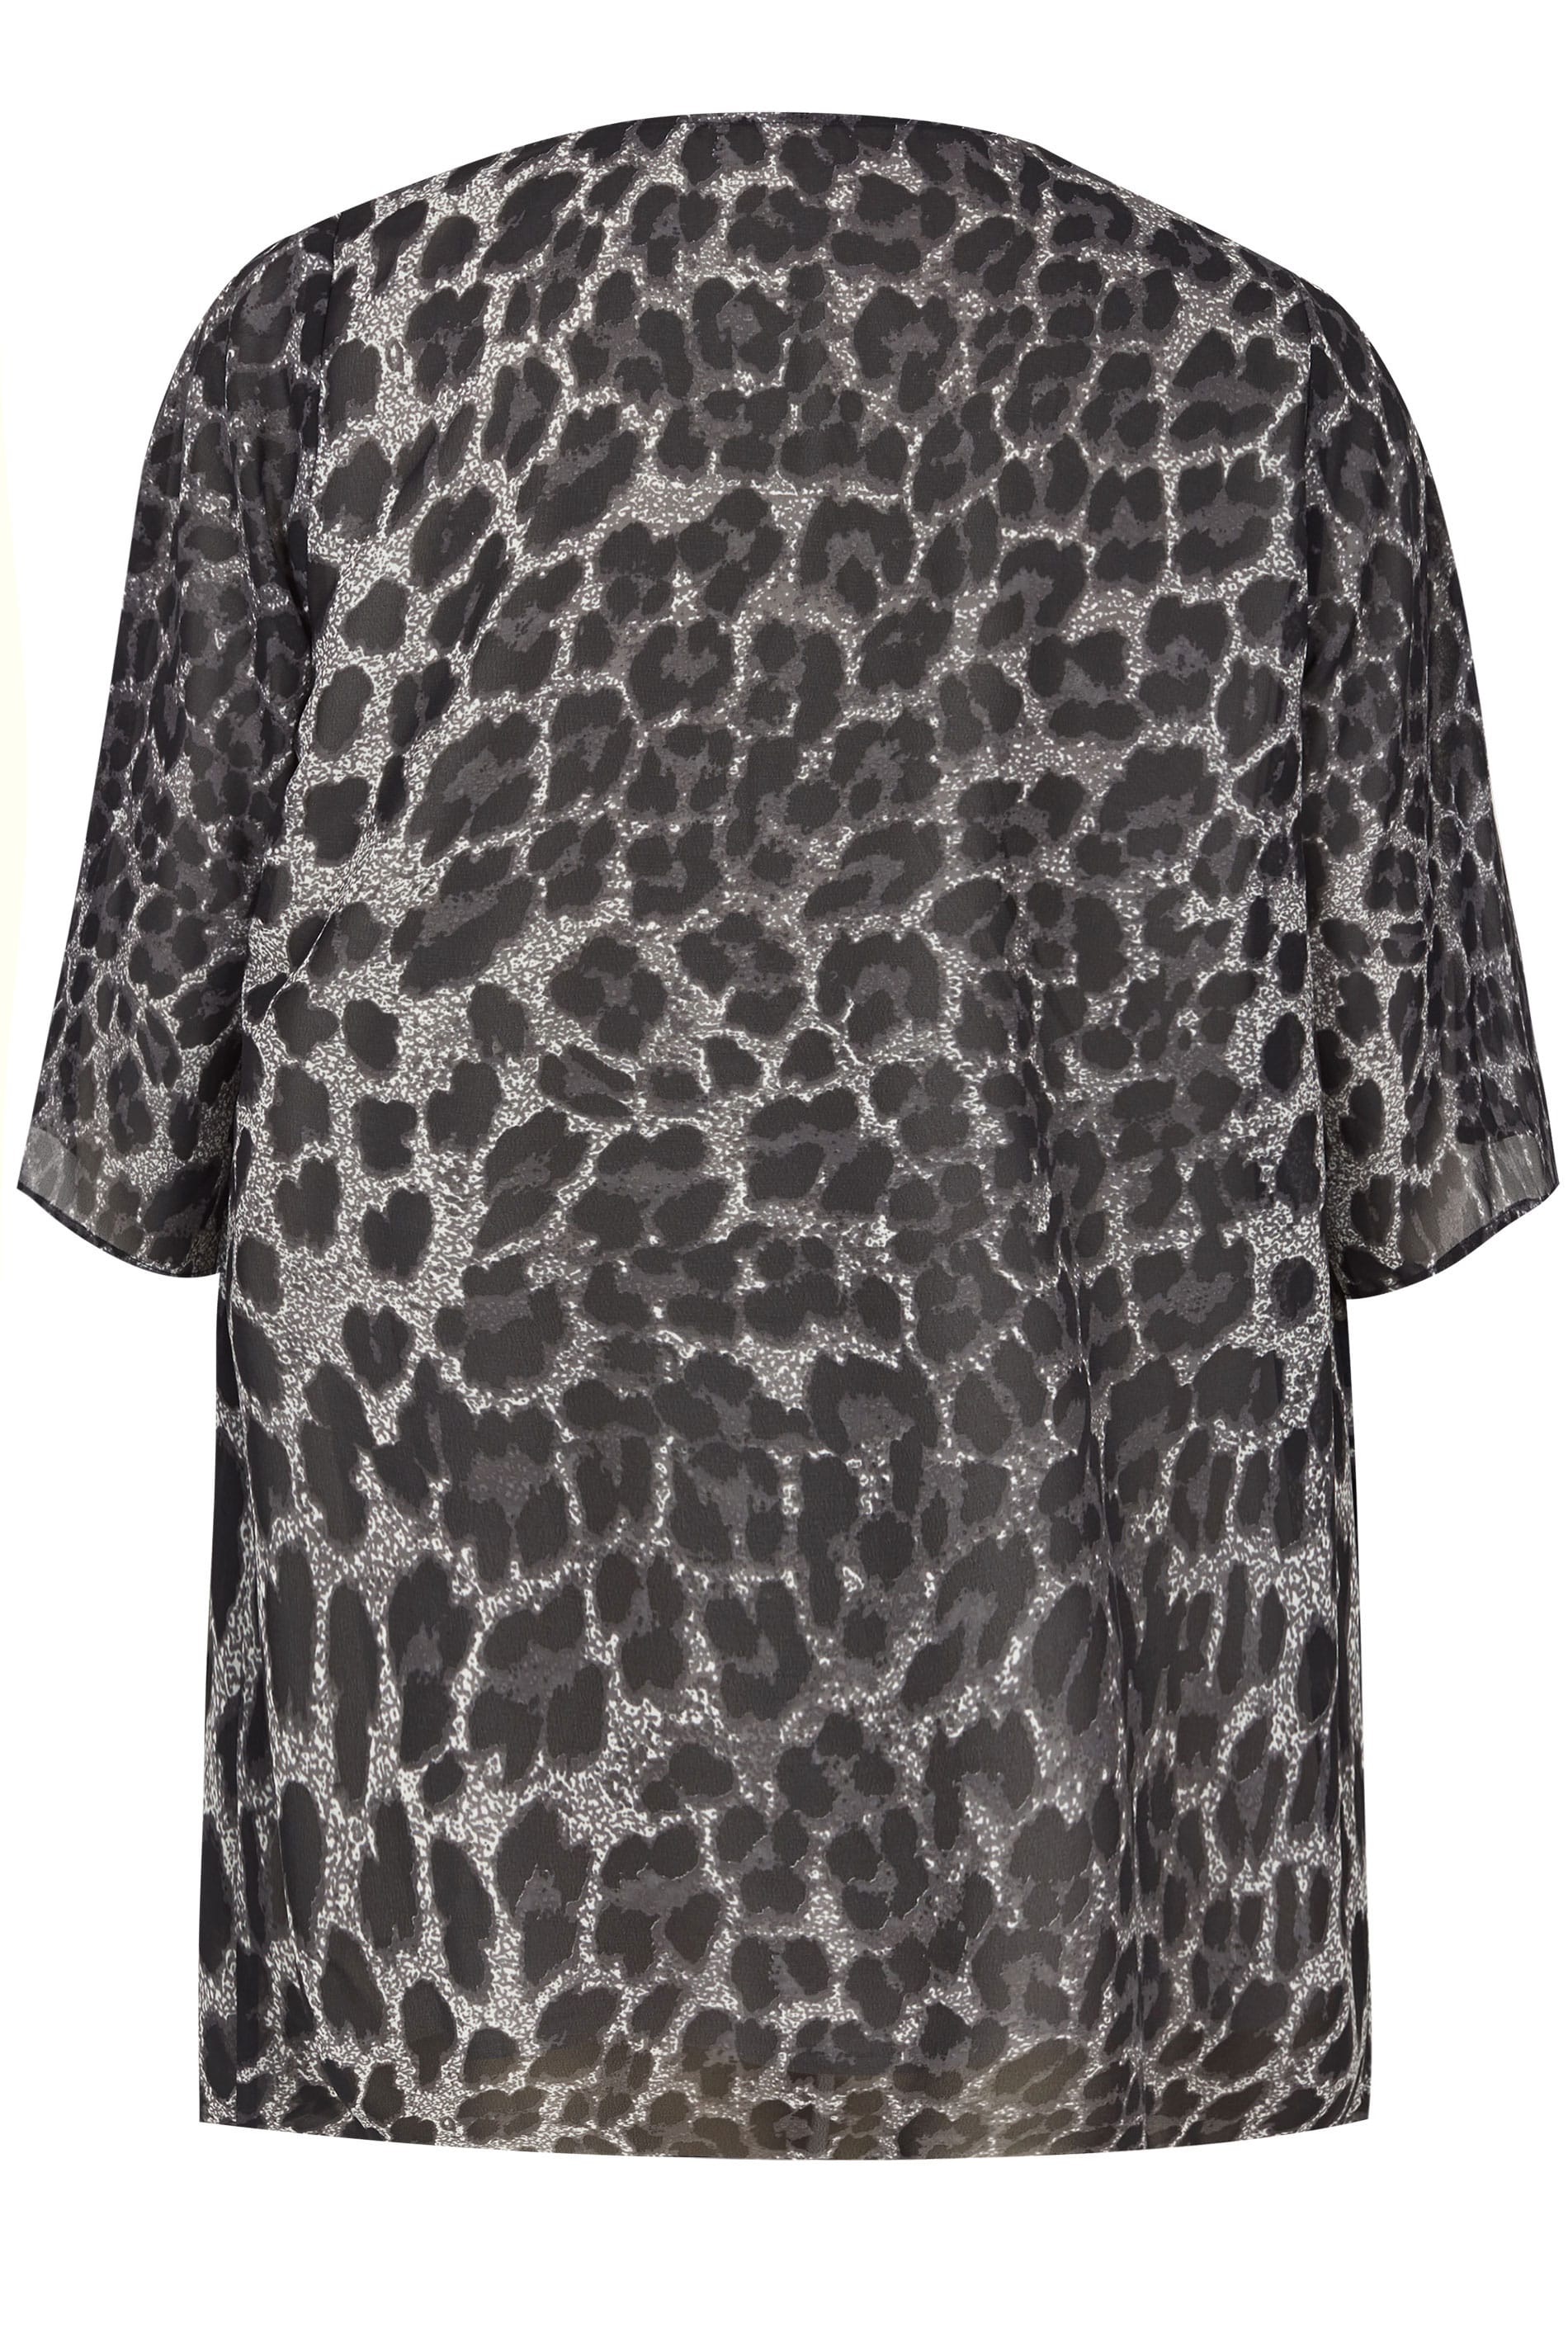 Grey Leopard Print Cover Up, Plus size 16 to 36